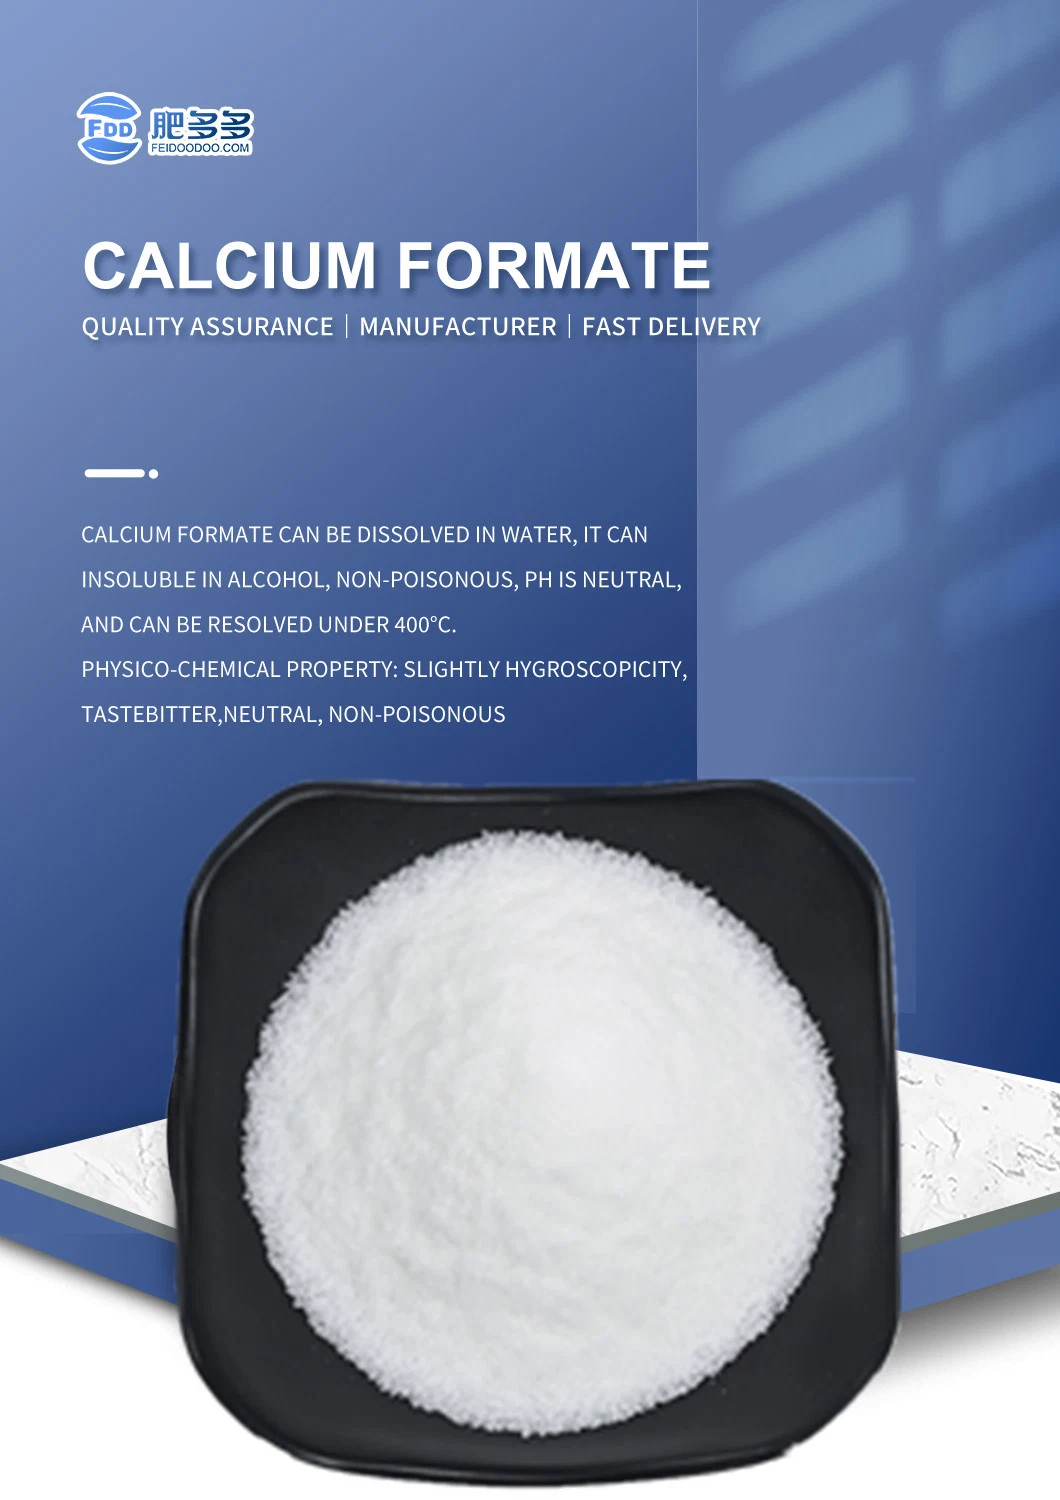 China Manufacturer Supply Feed Additive Calcium Formate